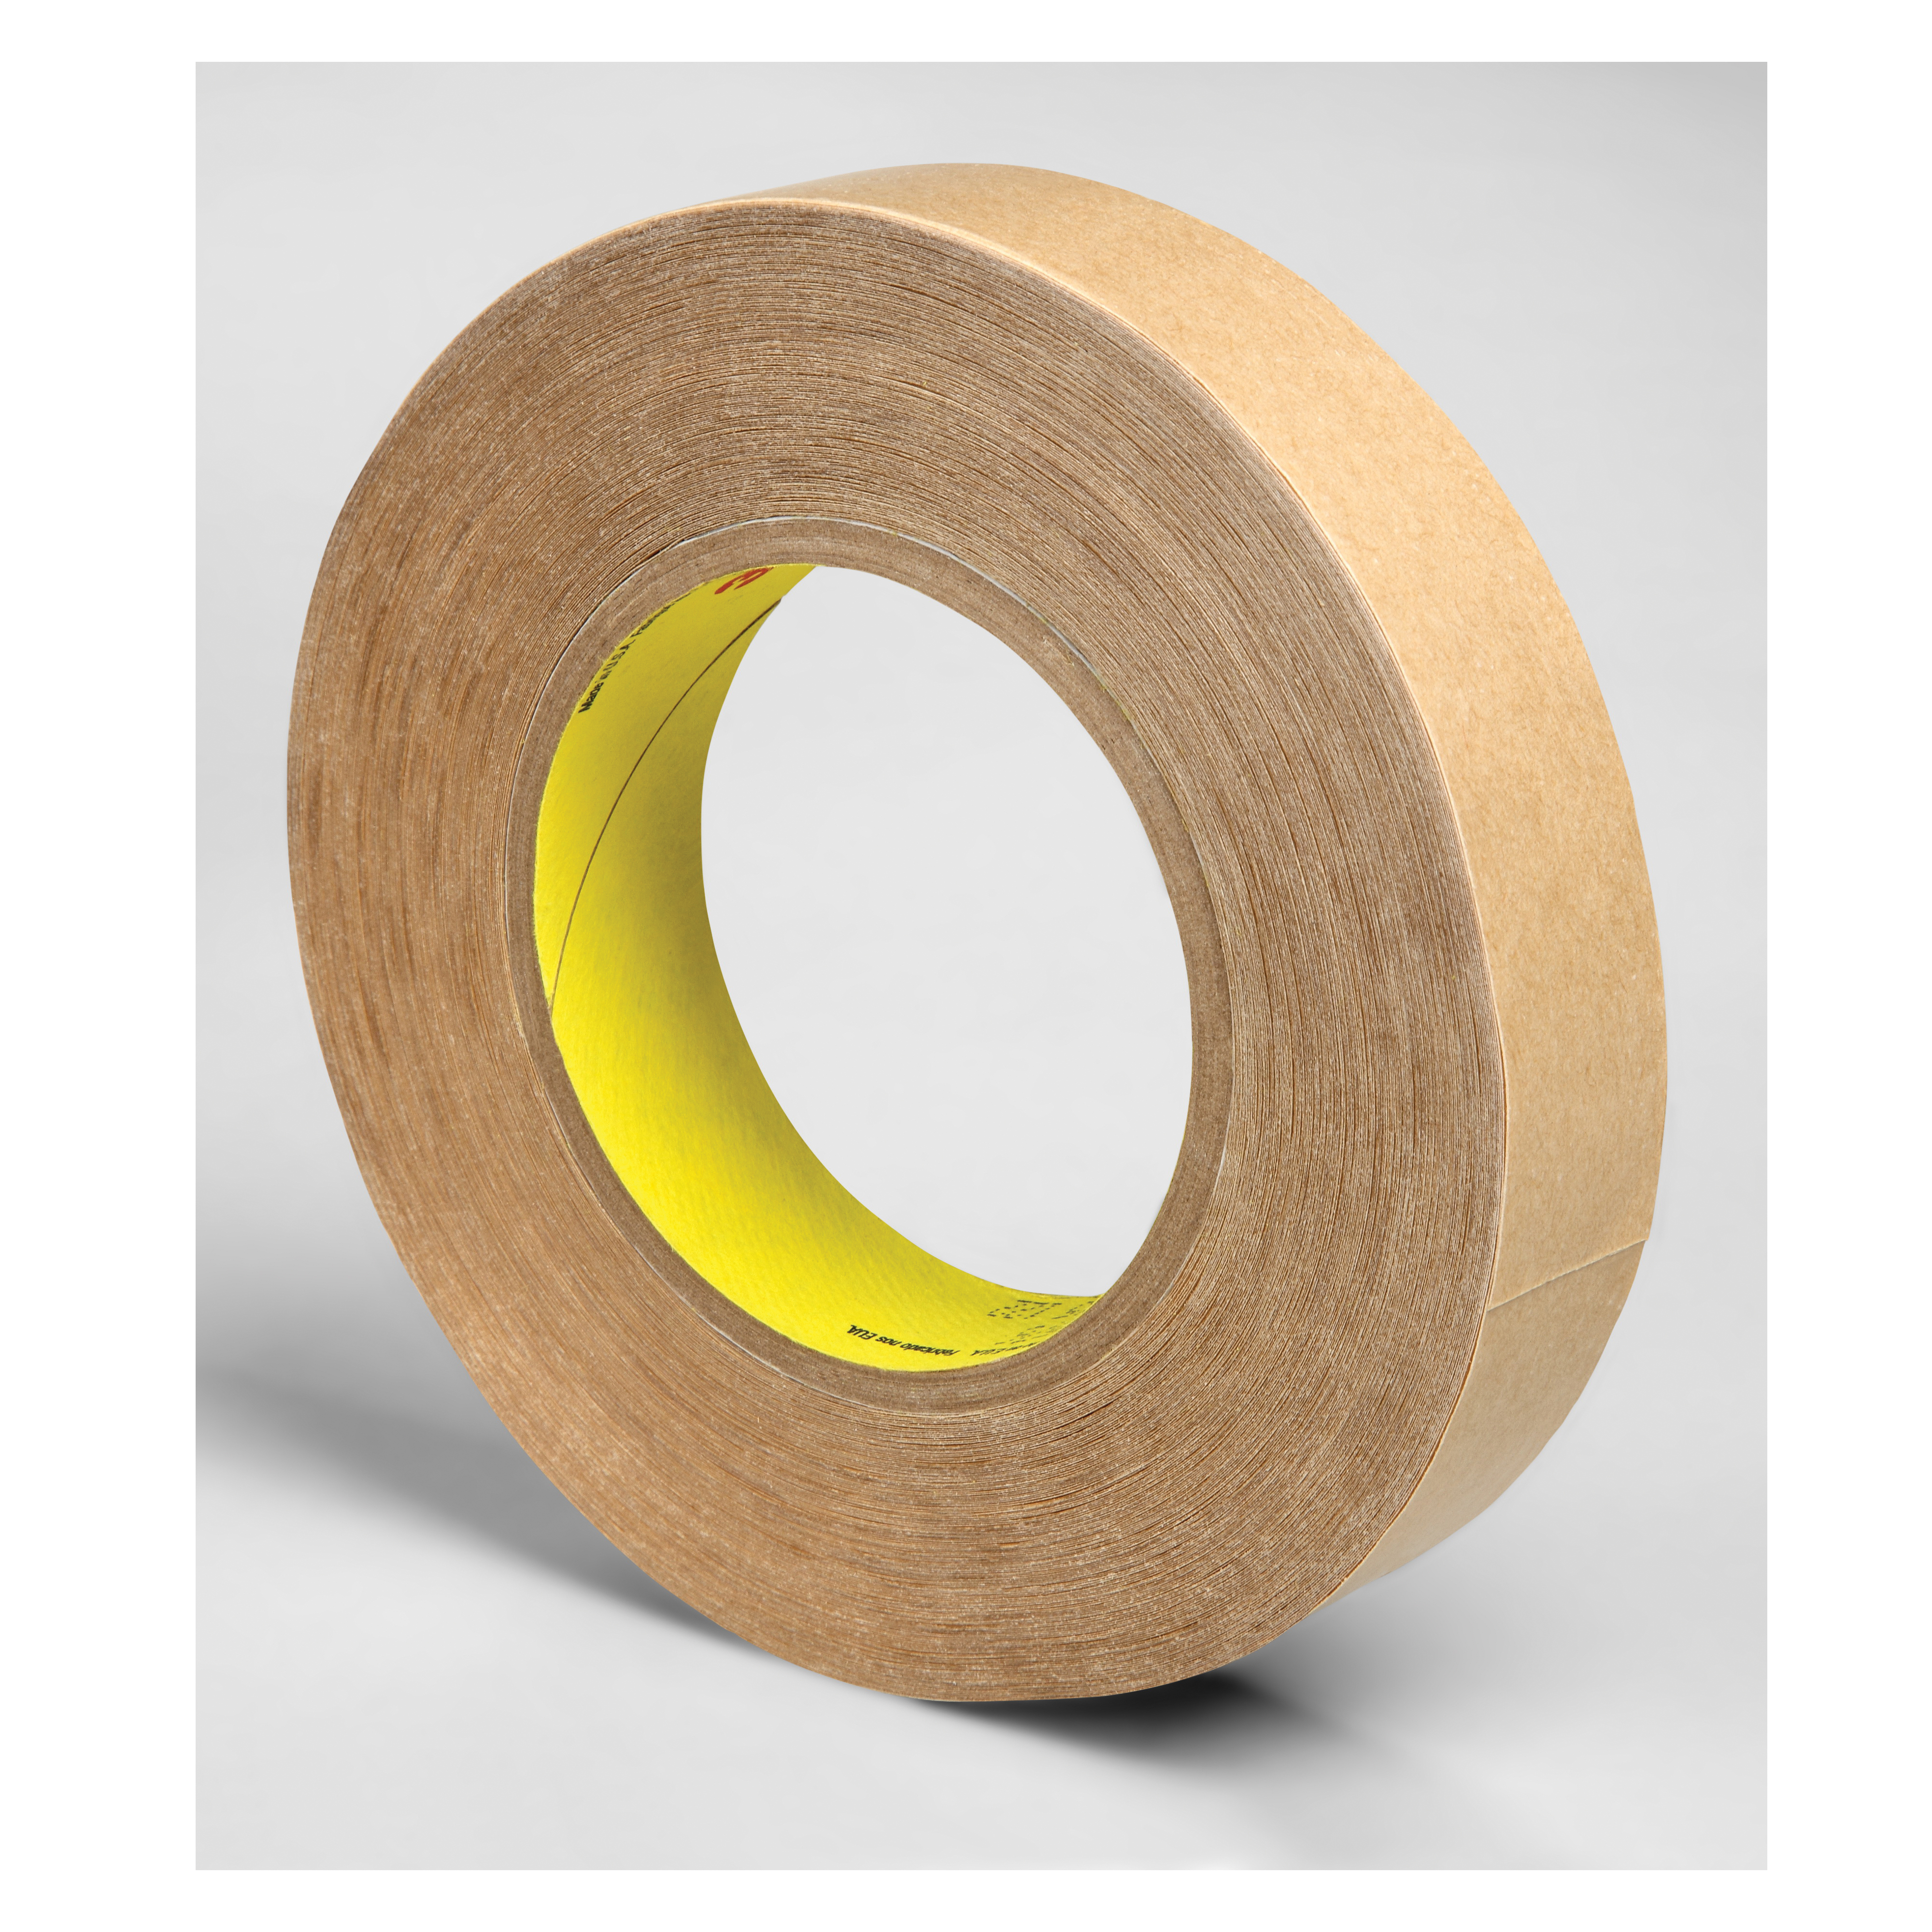 3M™ 021200-84267 Double Coated Tape, 60 yd L x 1-1/2 in W, 4 mil THK, 400HT Acrylic Adhesive, Polypropylene Backing, Clear